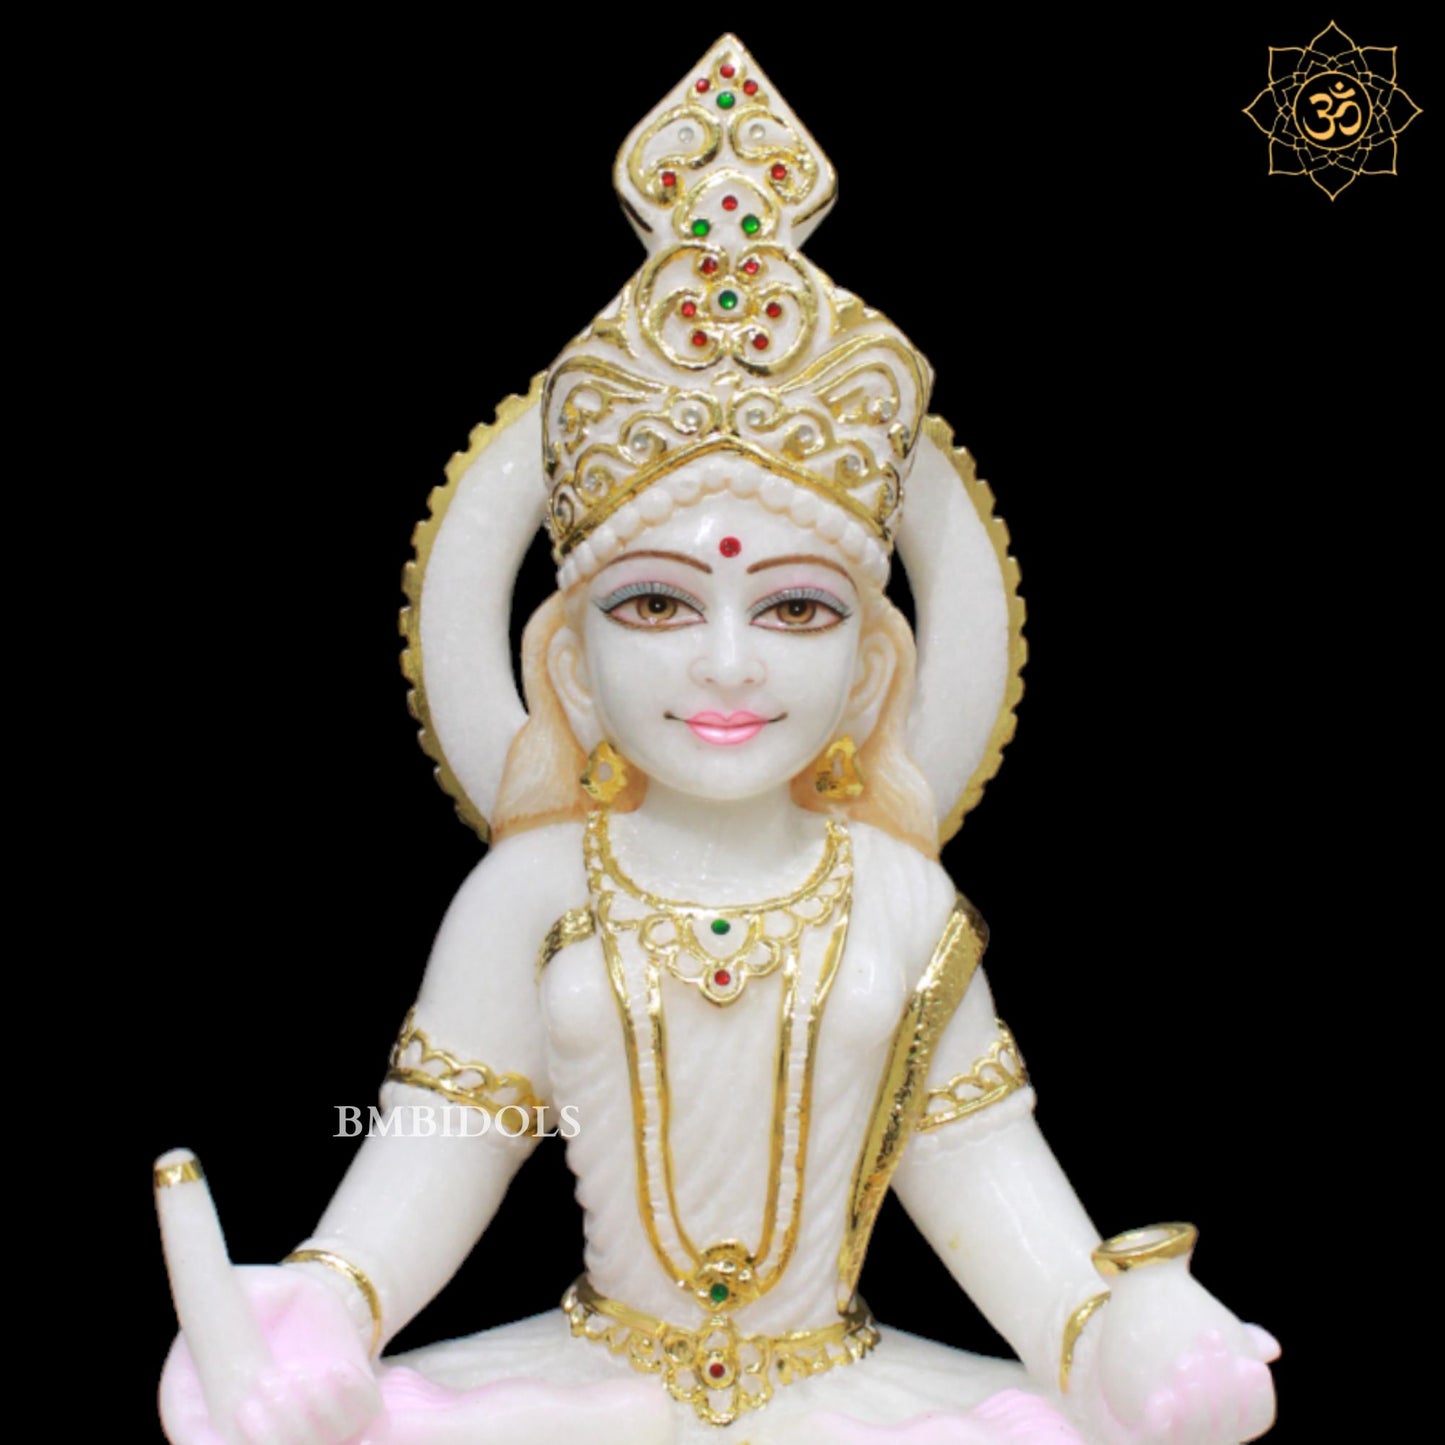 Marble Annapurna Maa Murti in 18inches made in Makrana Marble